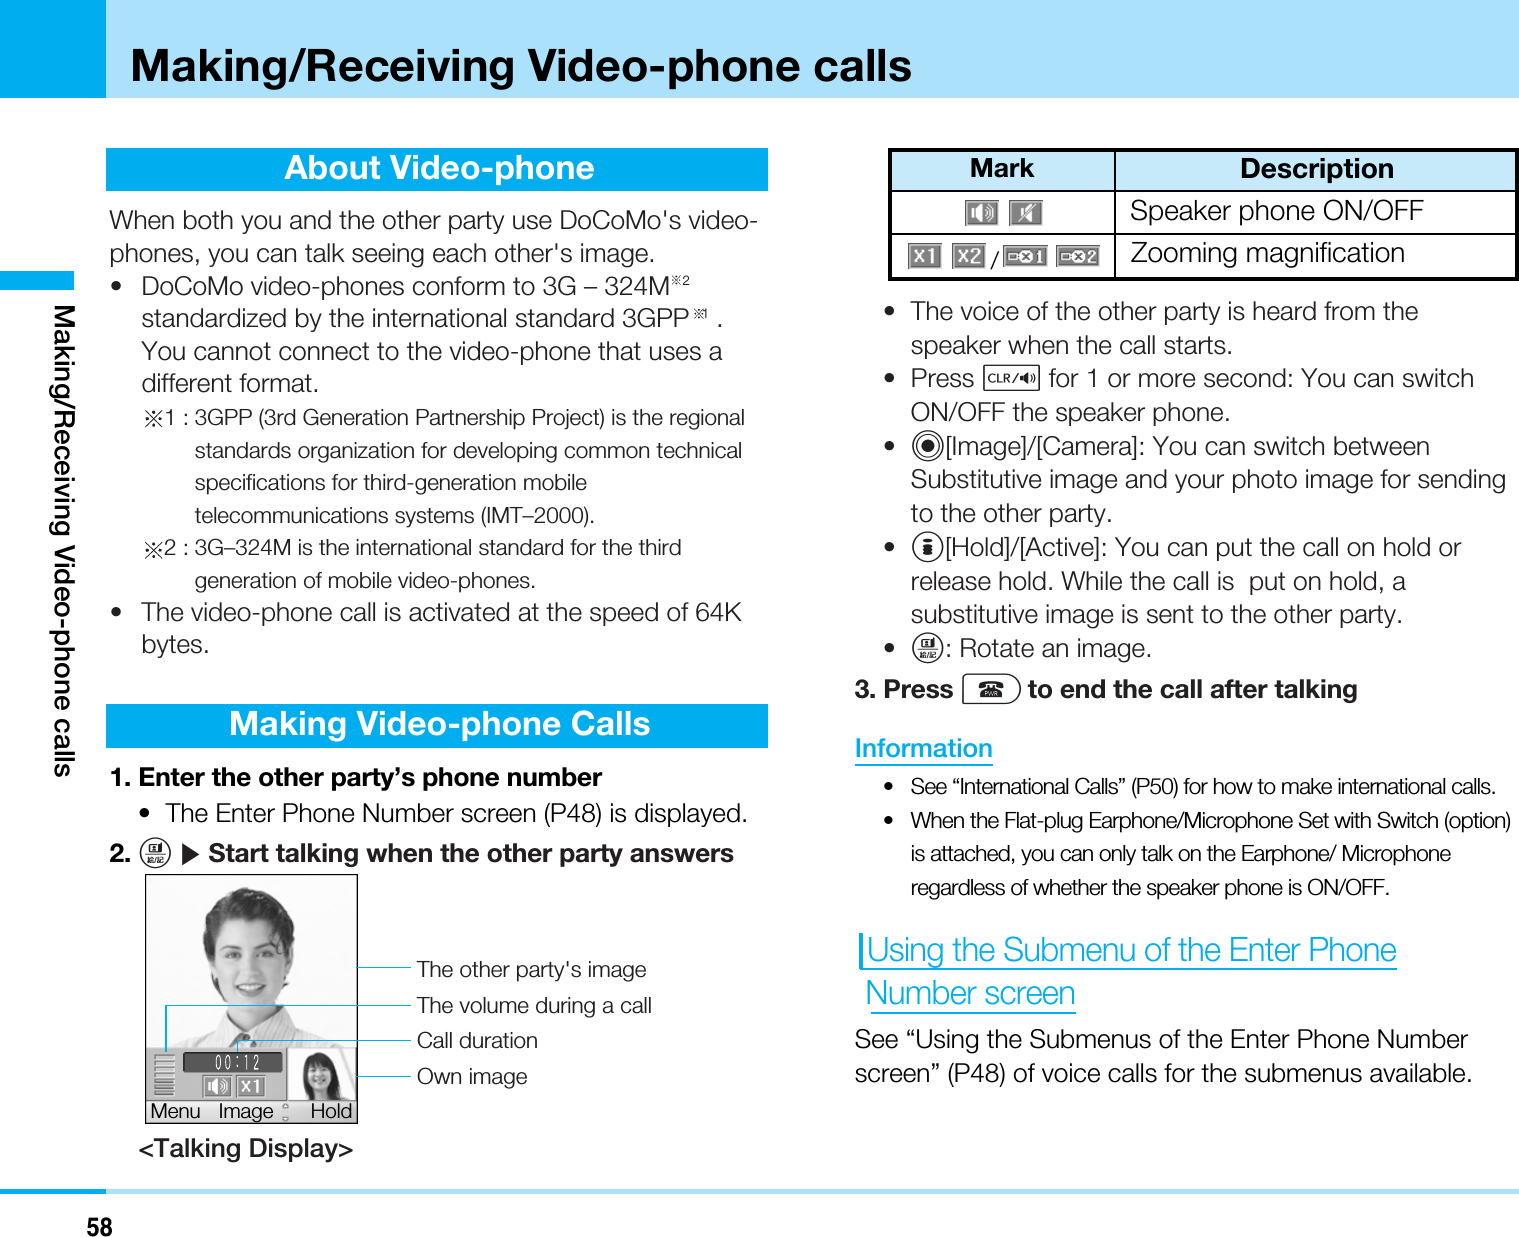 58Making/Receiving Video-phone callsMaking/Receiving Video-phone callsAbout Video-phoneWhen both you and the other party use DoCoMo&apos;s video-phones, you can talk seeing each other&apos;s image.• DoCoMo video-phones conform to 3G – 324M 2standardized by the international standard 3GPP 1.You cannot connect to the video-phone that uses adifferent format.1 : 3GPP (3rd Generation Partnership Project) is the regionalstandards organization for developing common technicalspecifications for third-generation mobiletelecommunications systems (IMT–2000).2 : 3G–324M is the international standard for the thirdgeneration of mobile video-phones.• The video-phone call is activated at the speed of 64Kbytes.Making Video-phone Calls1. Enter the other party’s phone number• The Enter Phone Number screen (P48) is displayed.2. T]Start talking when the other party answers&lt;Talking Display&gt;• The voice of the other party is heard from thespeaker when the call starts.• Press Qfor 1 or more second: You can switchON/OFF the speaker phone.•C[Image]/[Camera]: You can switch betweenSubstitutive image and your photo image for sendingto the other party.•I[Hold]/[Active]: You can put the call on hold orrelease hold. While the call is  put on hold, asubstitutive image is sent to the other party.•T: Rotate an image.3. Press Pto end the call after talkingInformation• See “International Calls” (P50) for how to make international calls.• When the Flat-plug Earphone/Microphone Set with Switch (option)is attached, you can only talk on the Earphone/ Microphoneregardless of whether the speaker phone is ON/OFF.Using the Submenu of the Enter Phone Number screenSee “Using the Submenus of the Enter Phone Numberscreen” (P48) of voice calls for the submenus available.The other party&apos;s imageThe volume during a callCall durationOwn imageMenu HoldImageDescriptionMark/Speaker phone ON/OFFZooming magnification